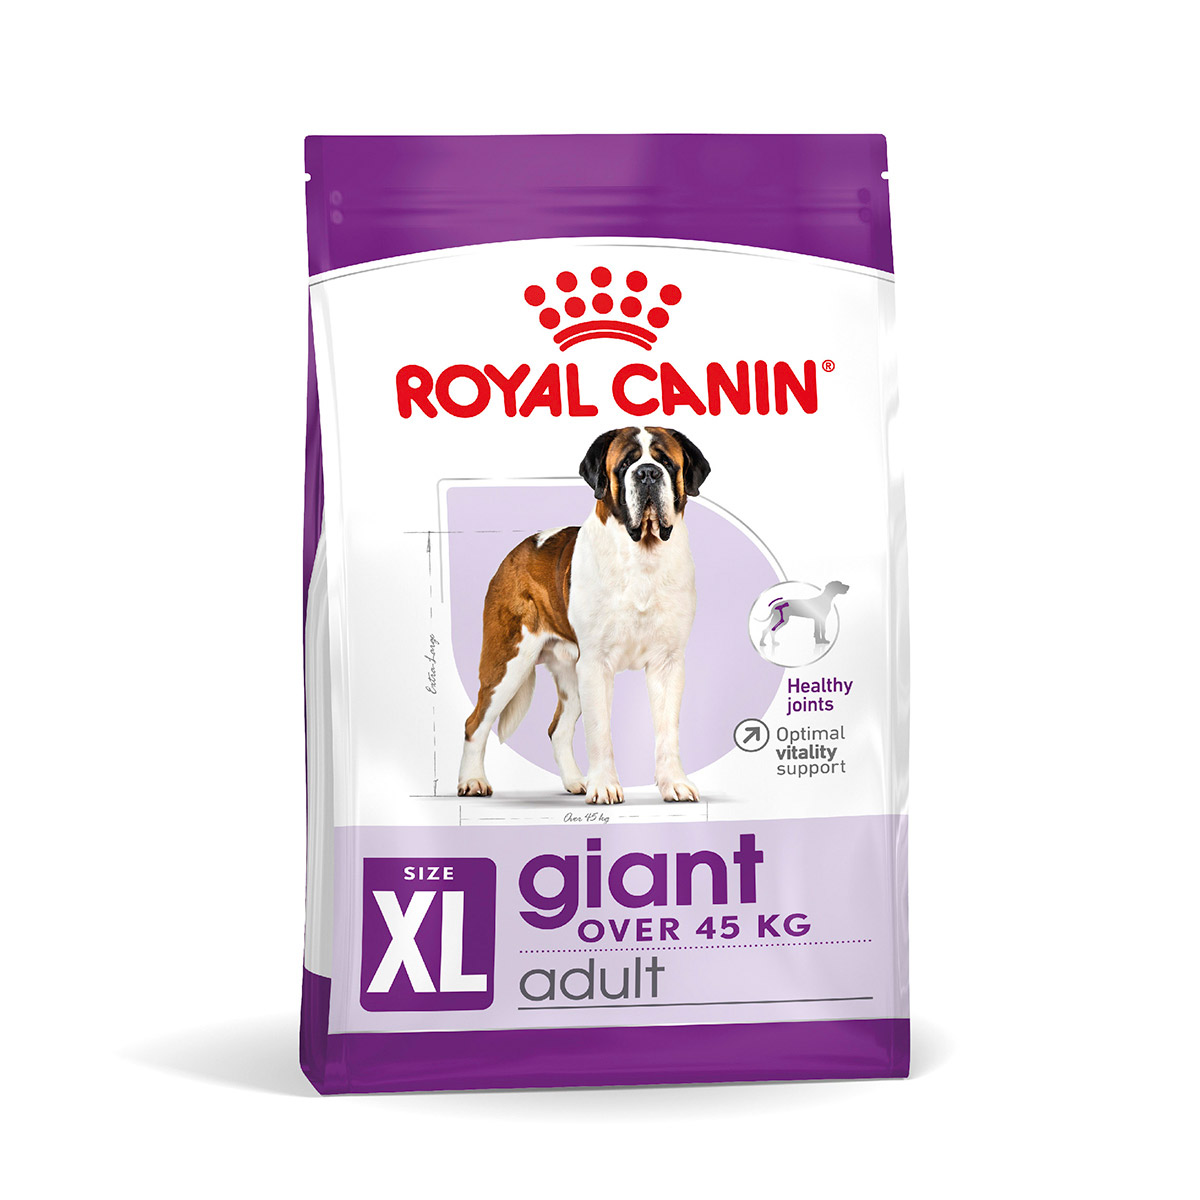 ROYAL CANIN GIANT Adult